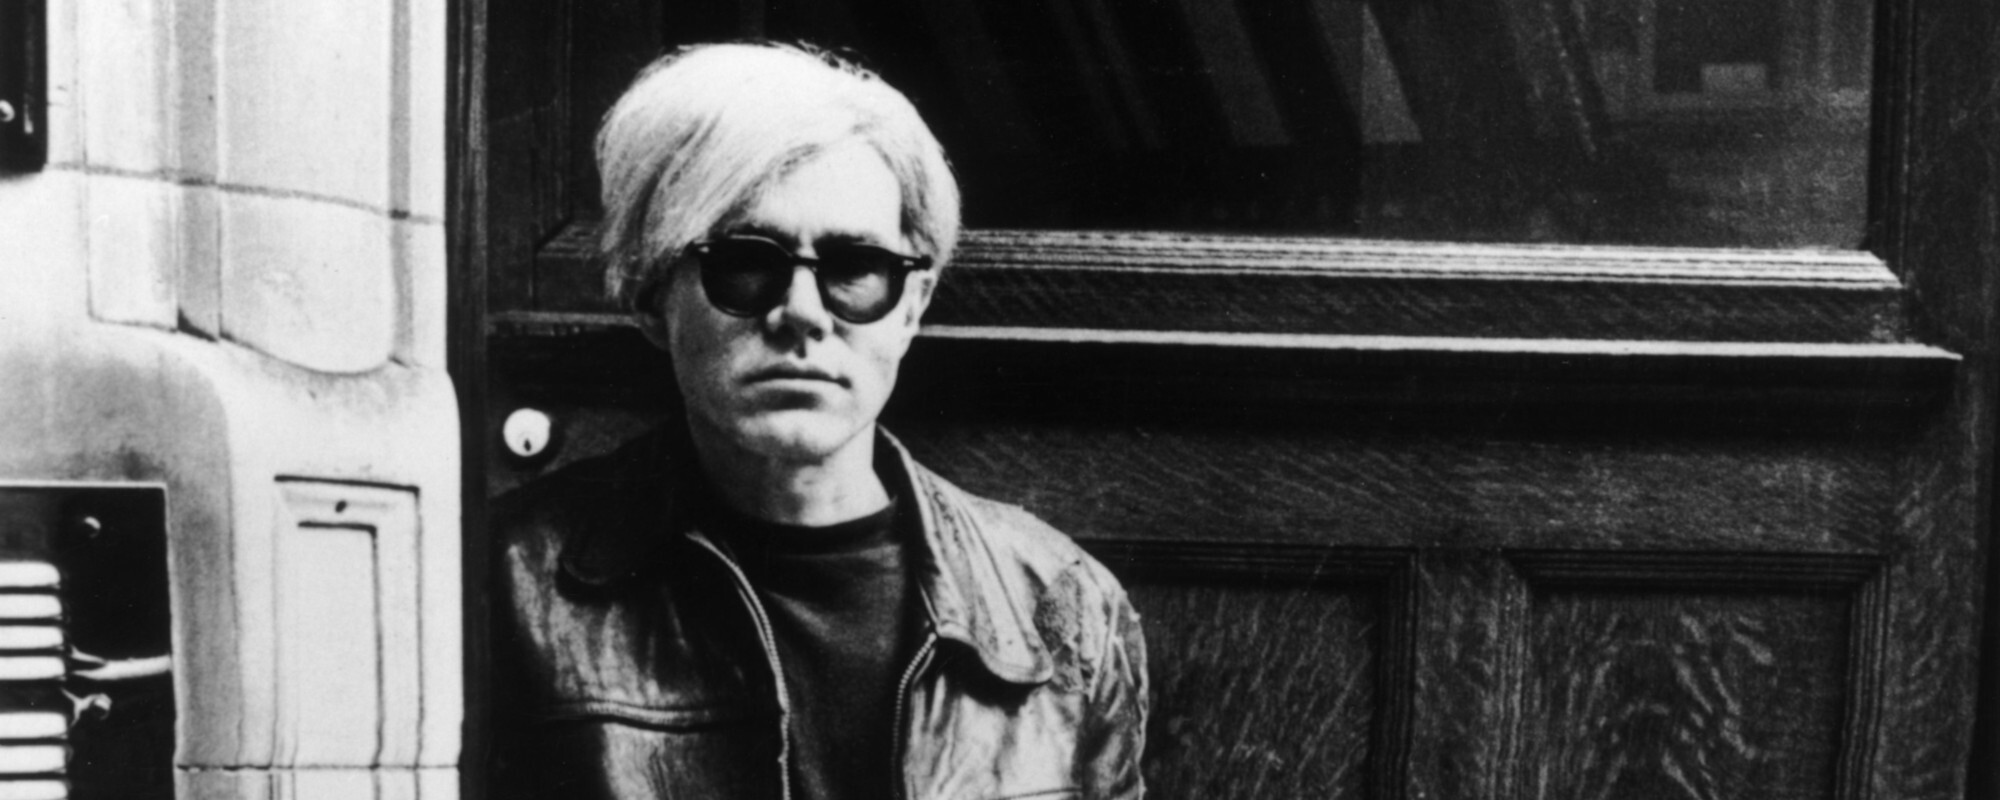 Face to Face, Warhol and Brown Reveal Deeper Meaning